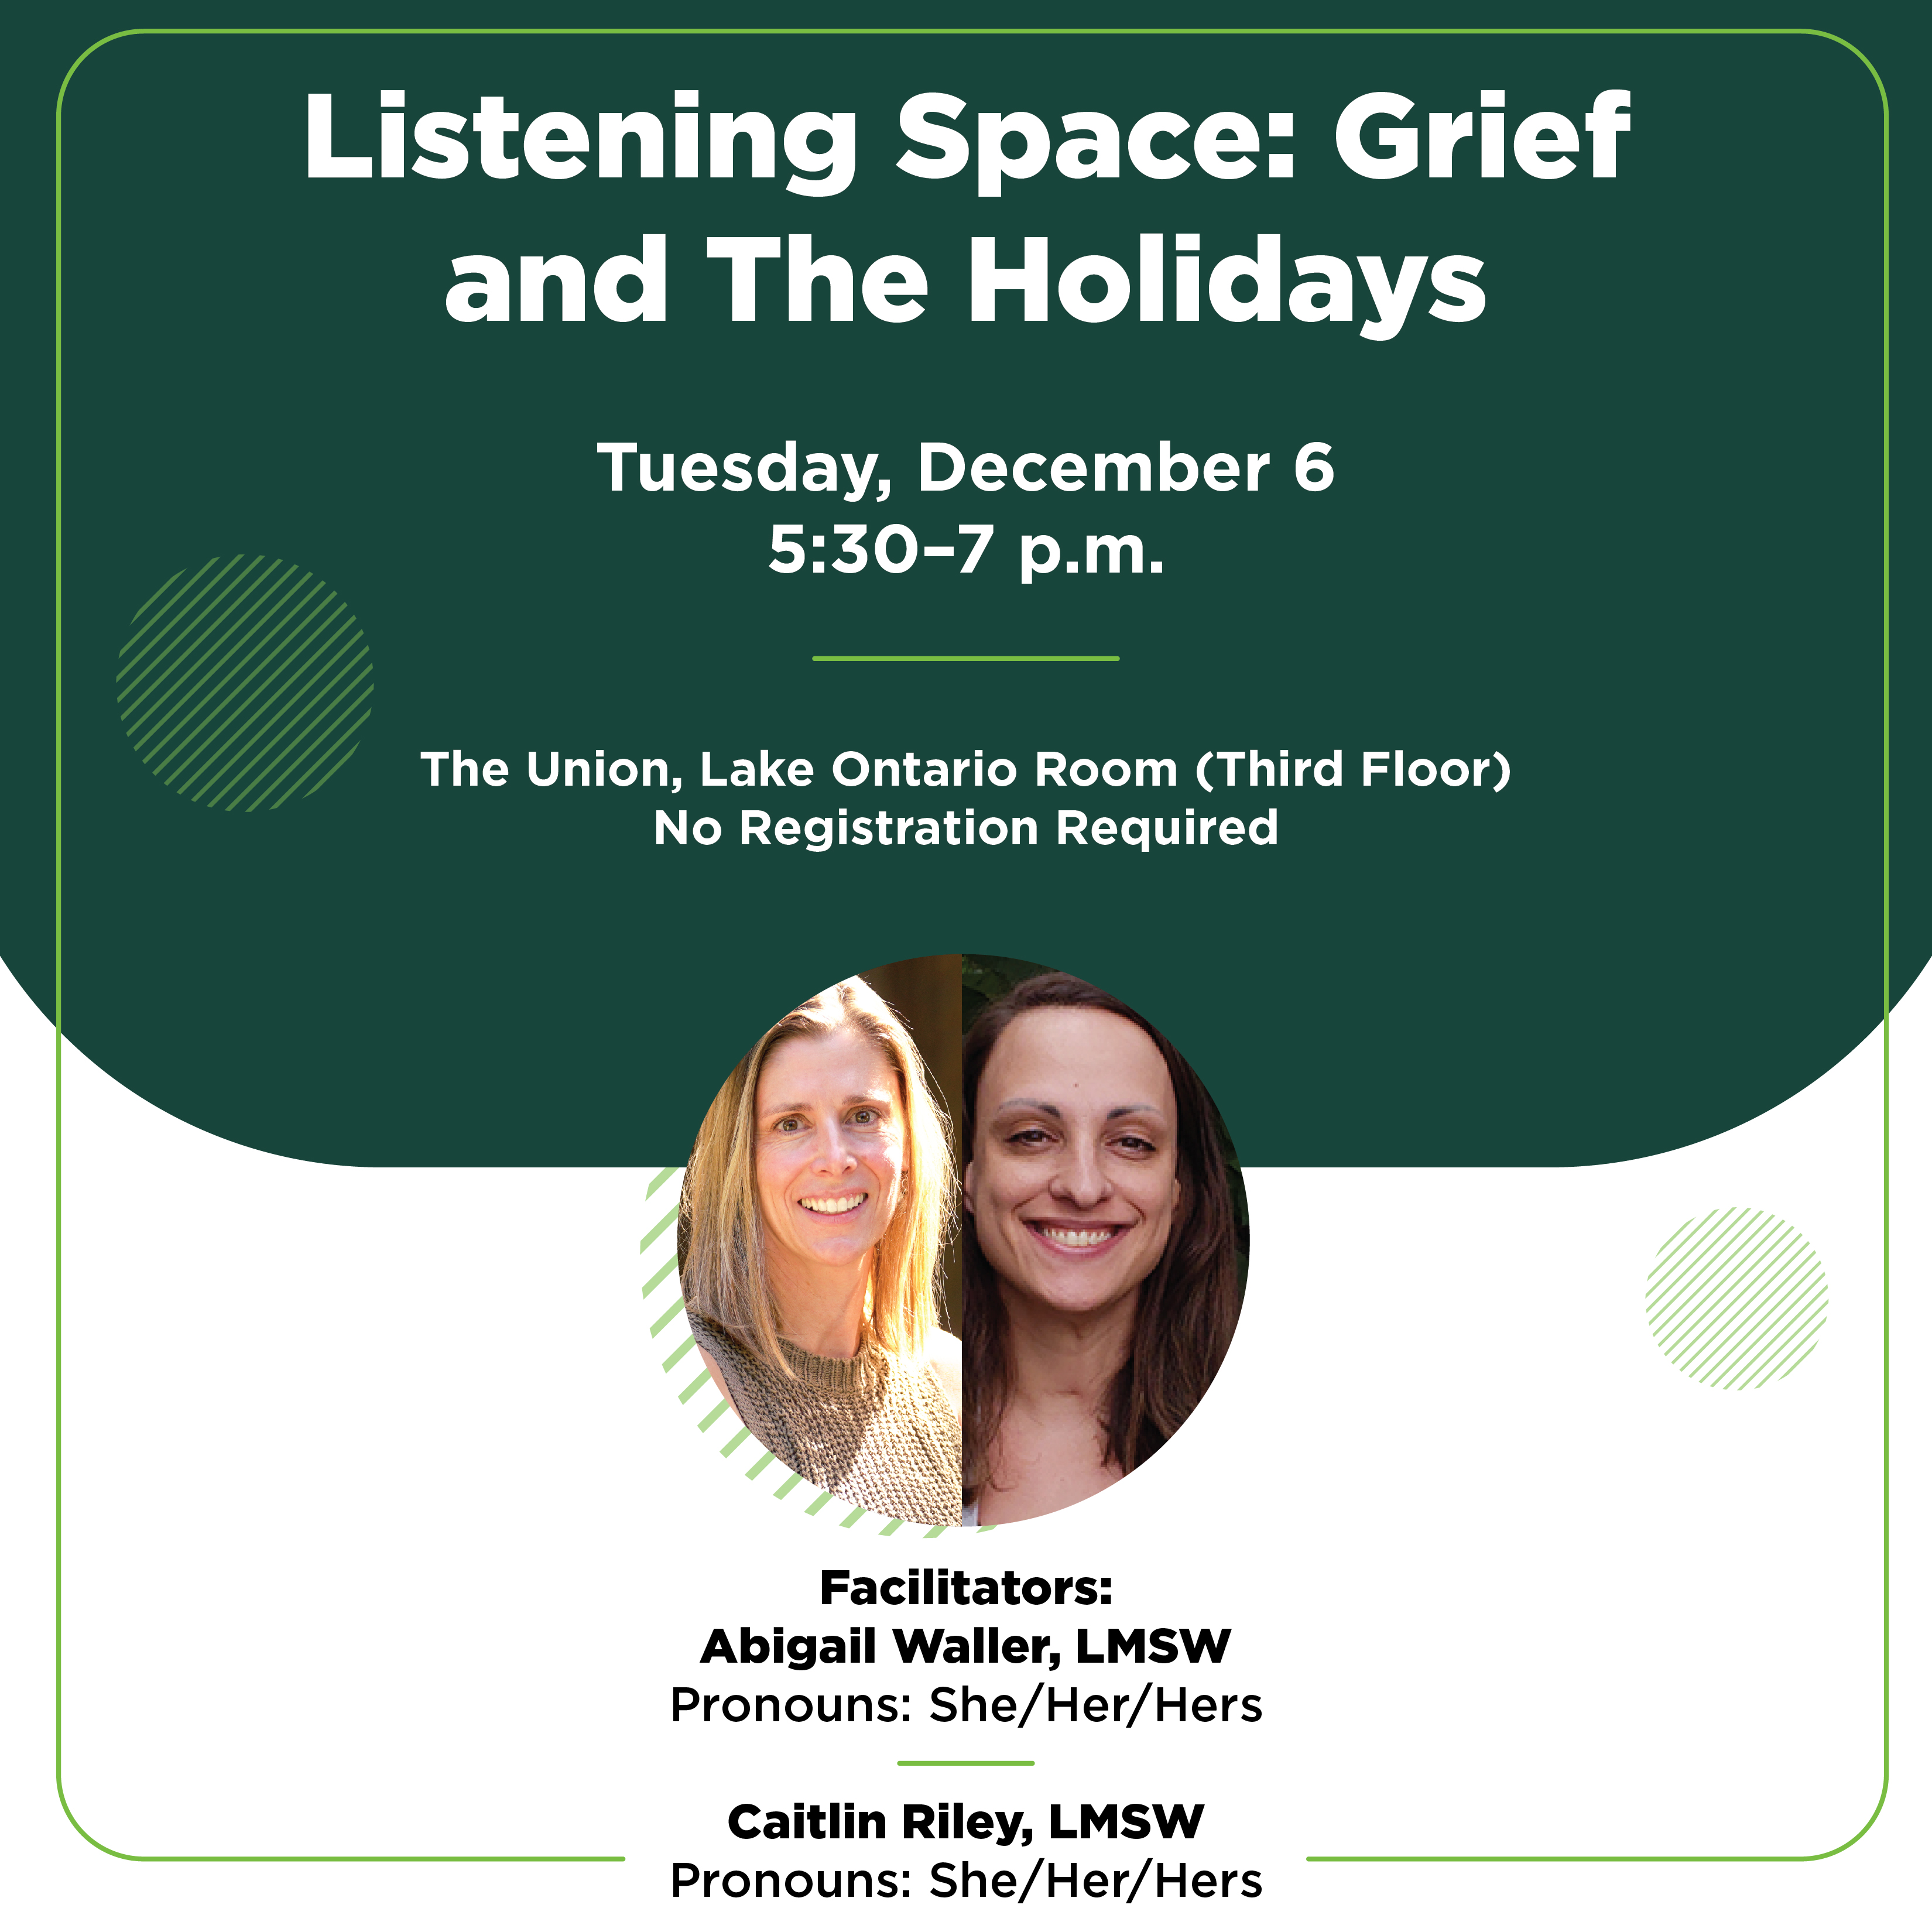 A flyer preview giving the time, date and location details of the listening space. Photos of Abigail Waller and Caitlin Riley also appear. both are smiling at the camera, enjoying time outside.